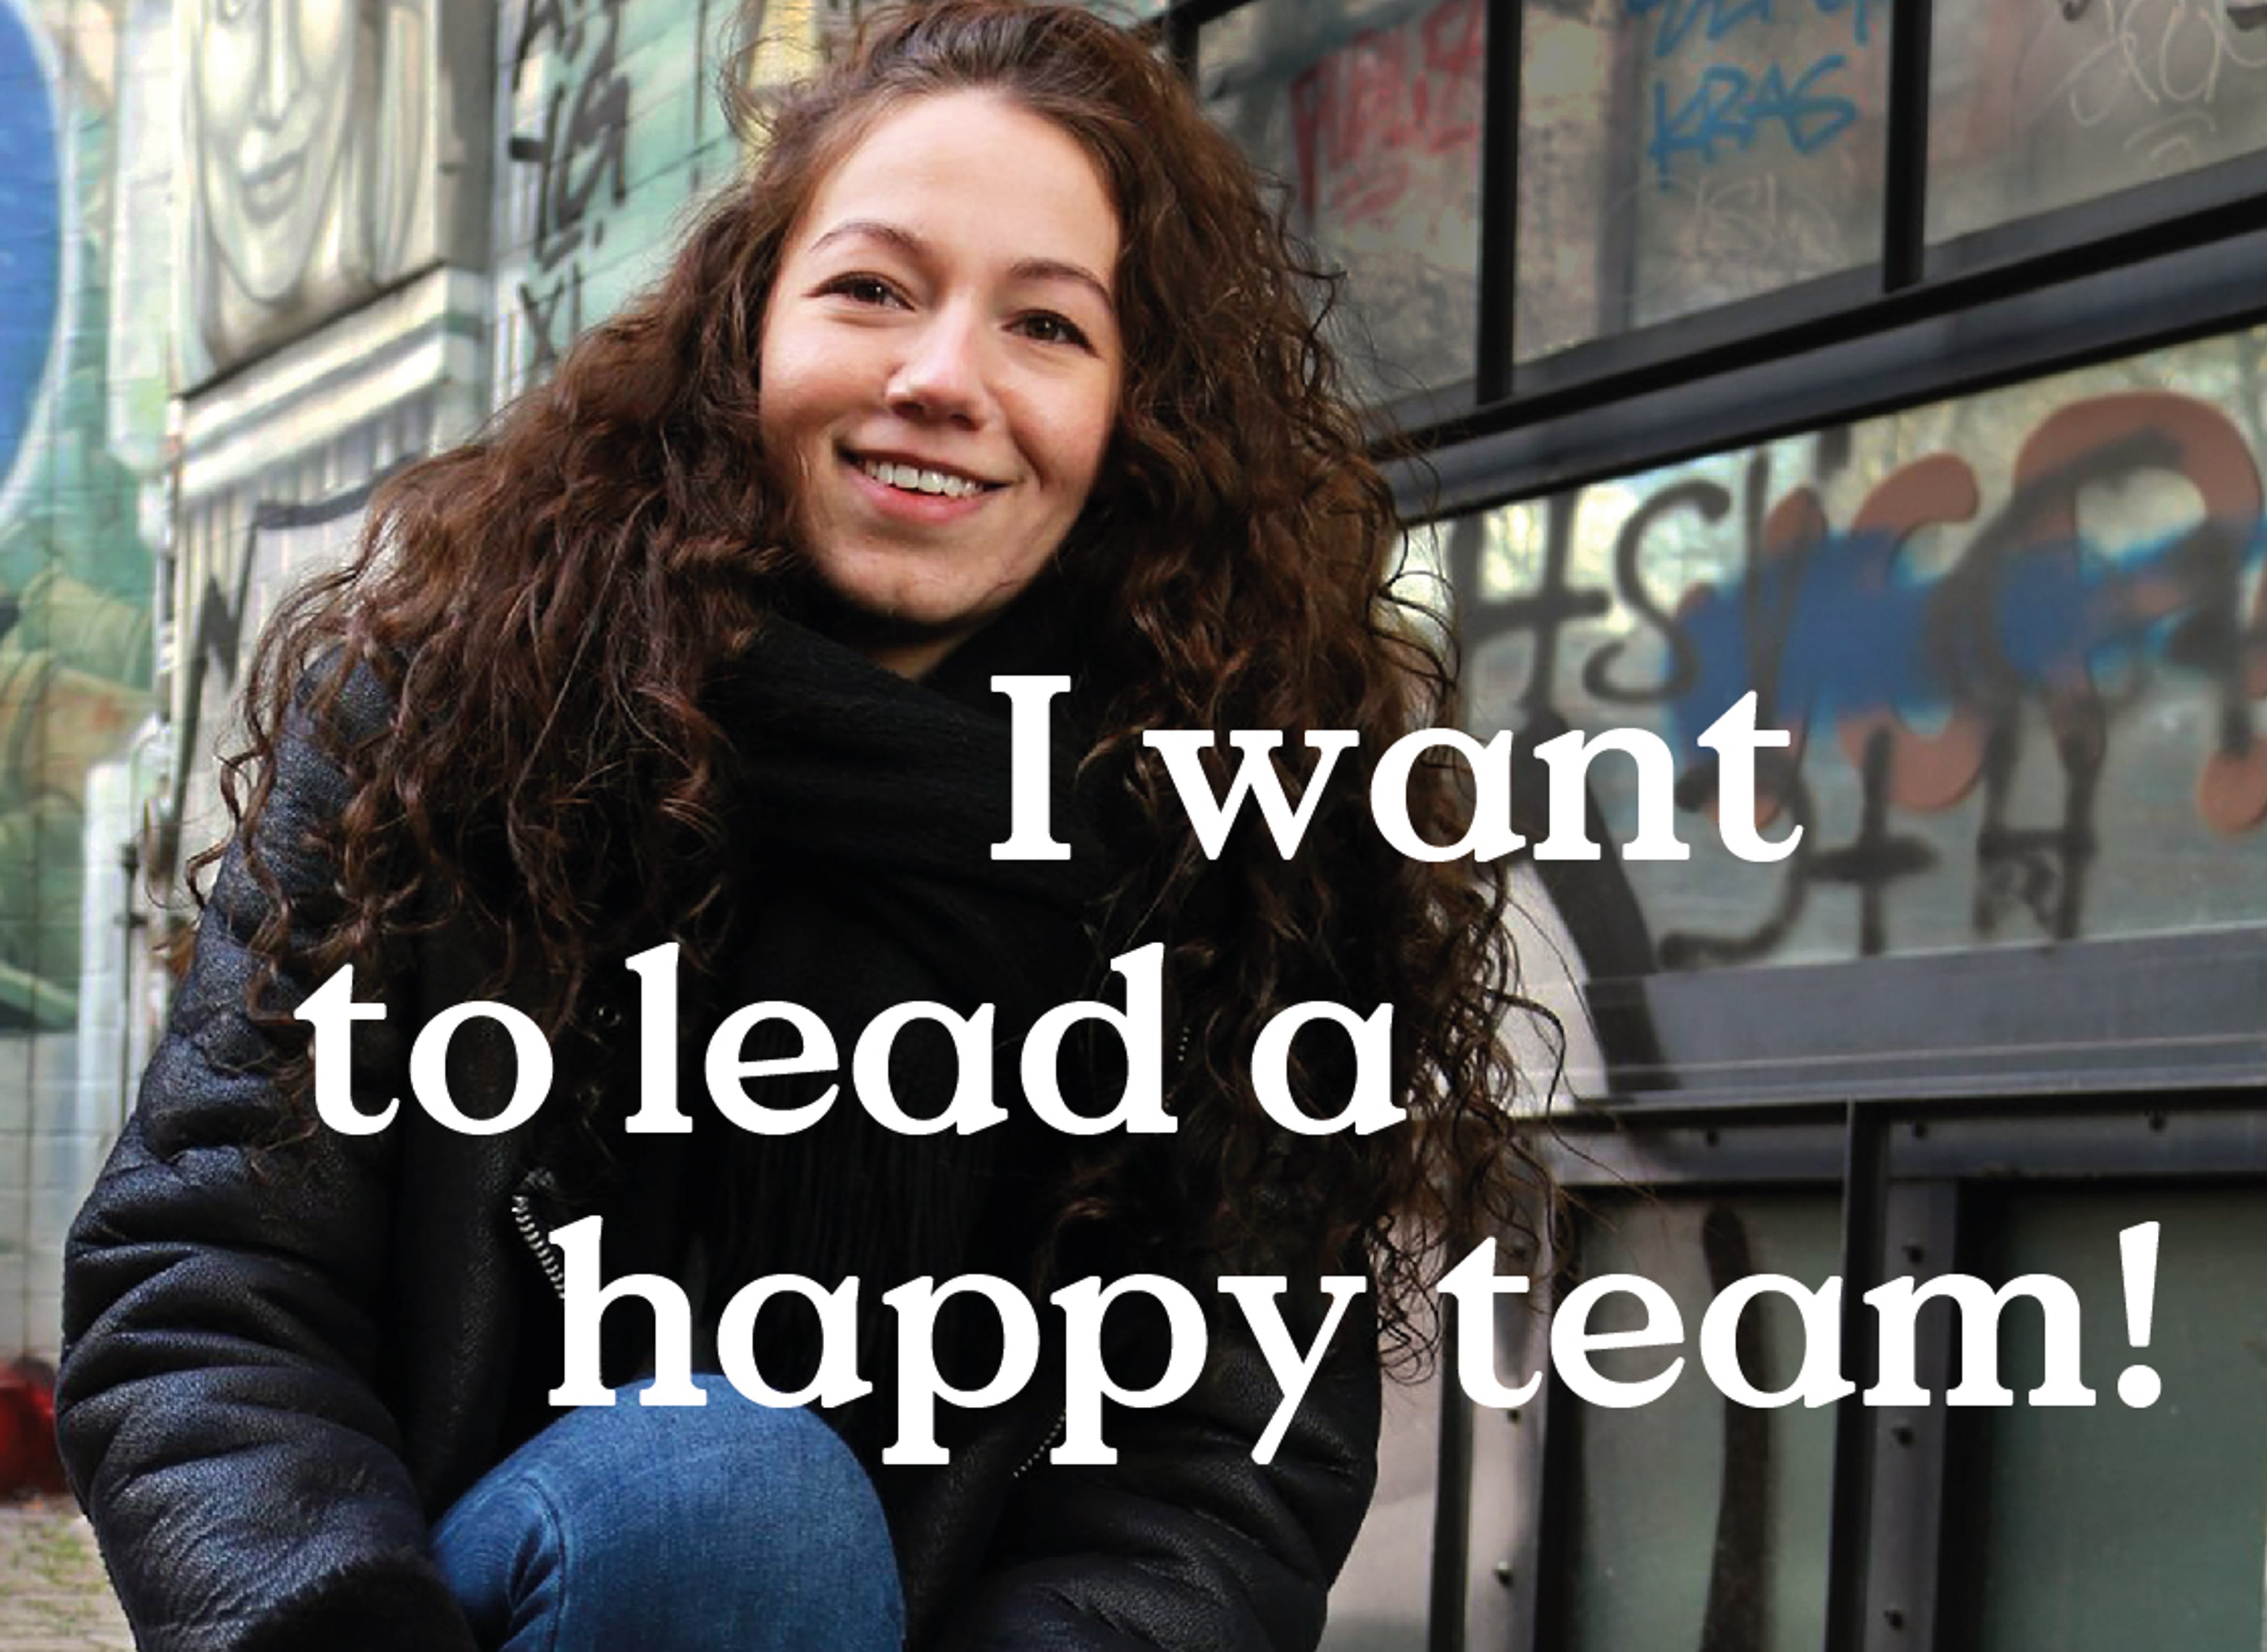 I want to lead a happy team!